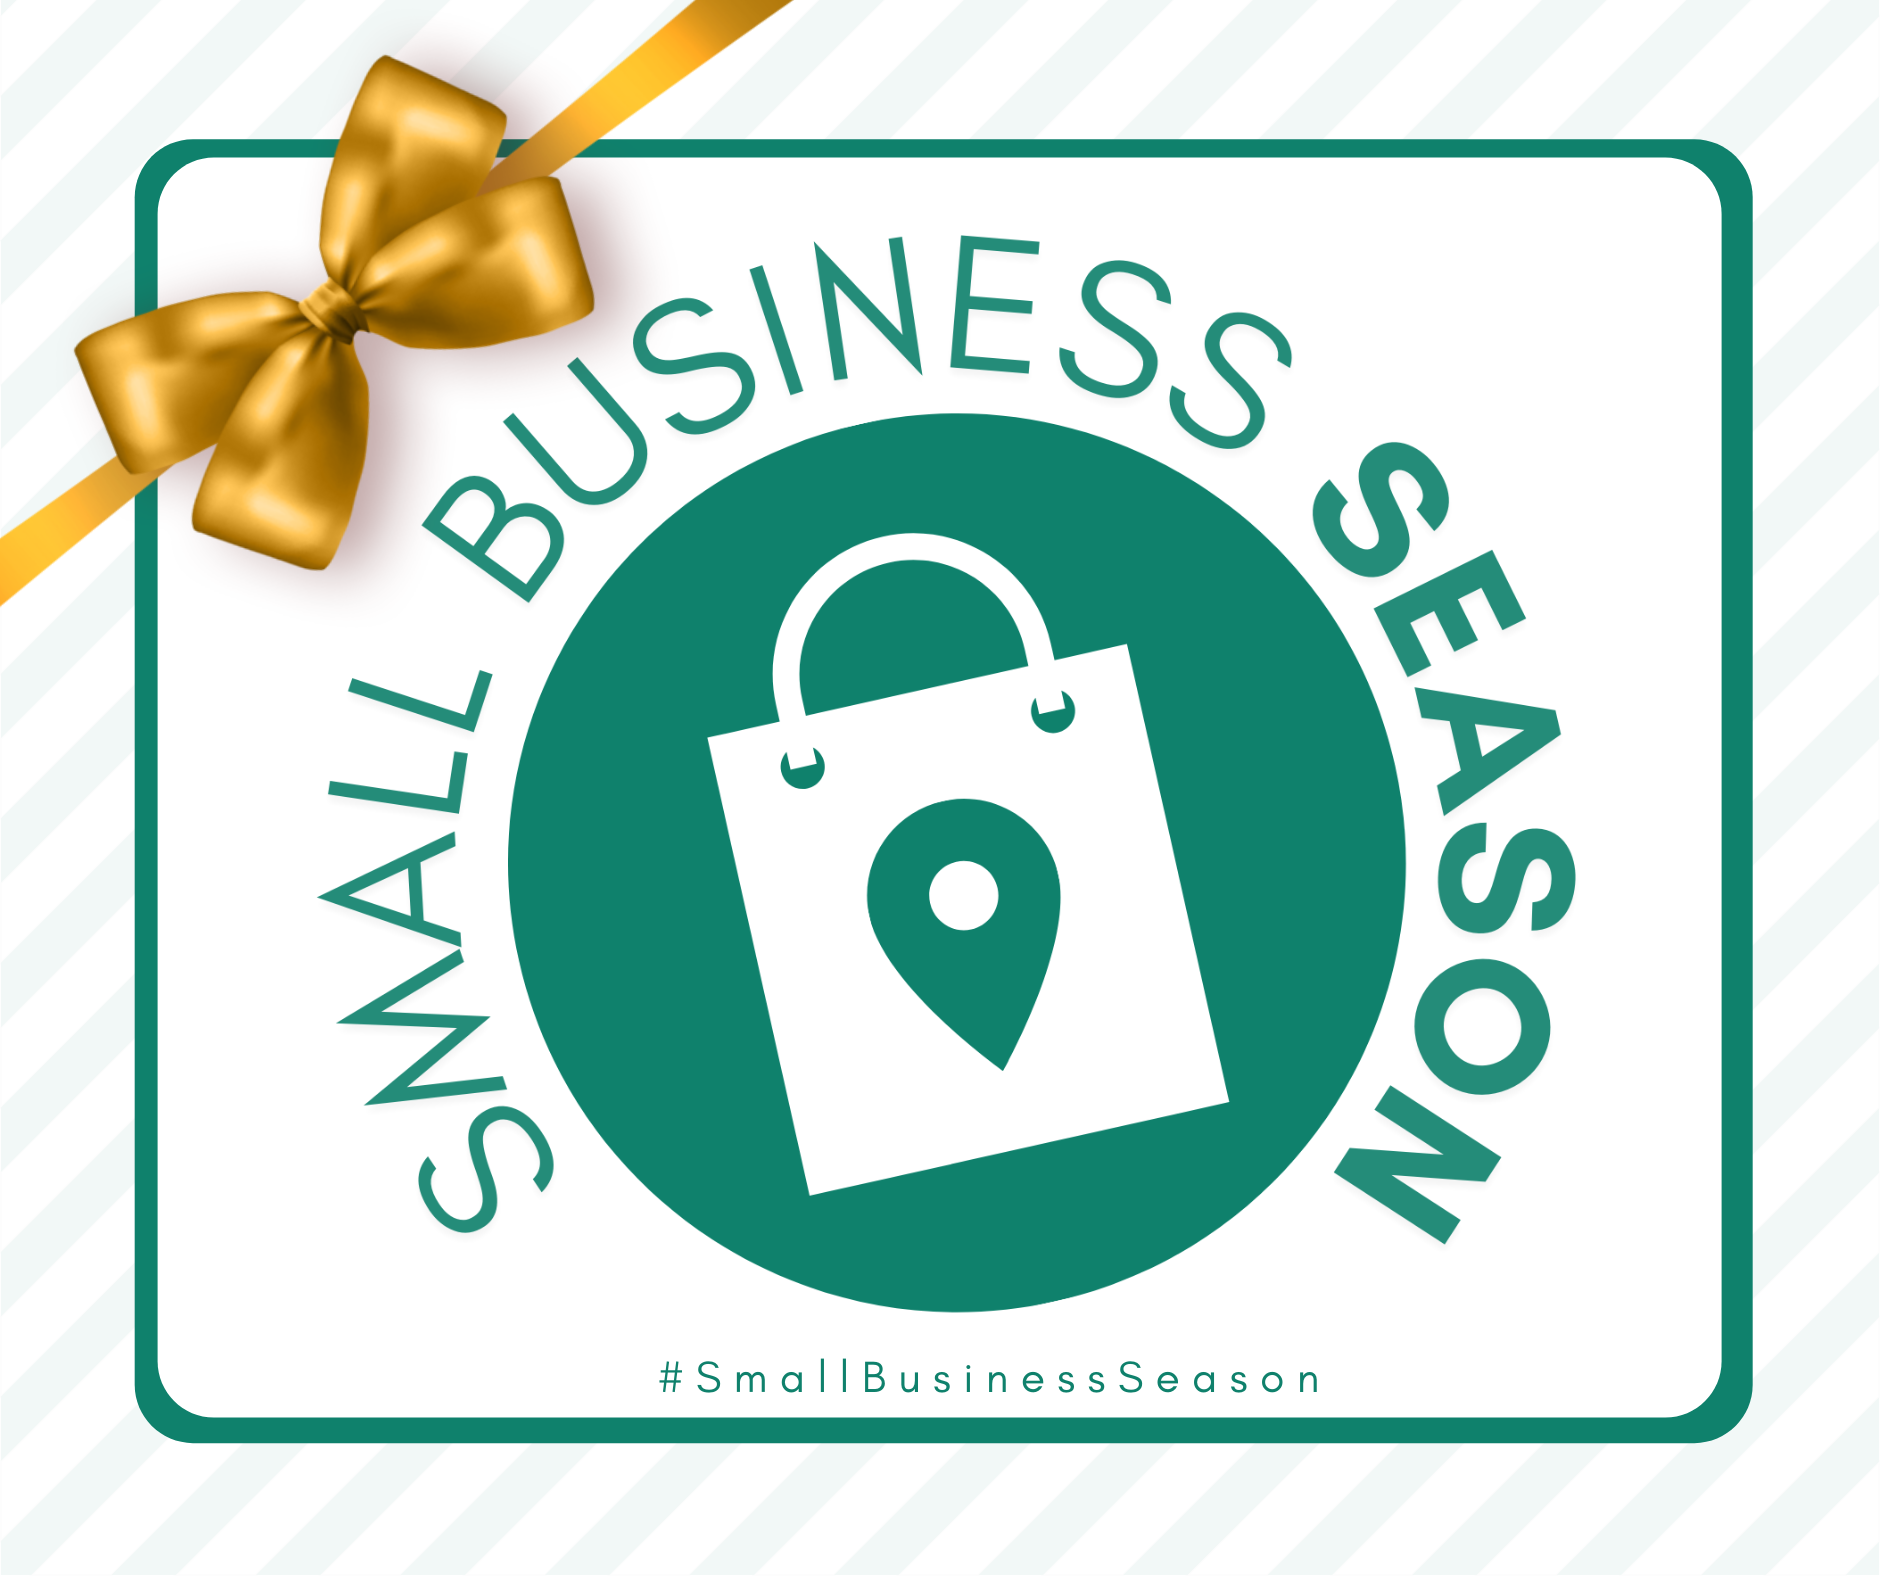 Creating a Memorable Buying Experience This Small Business Season